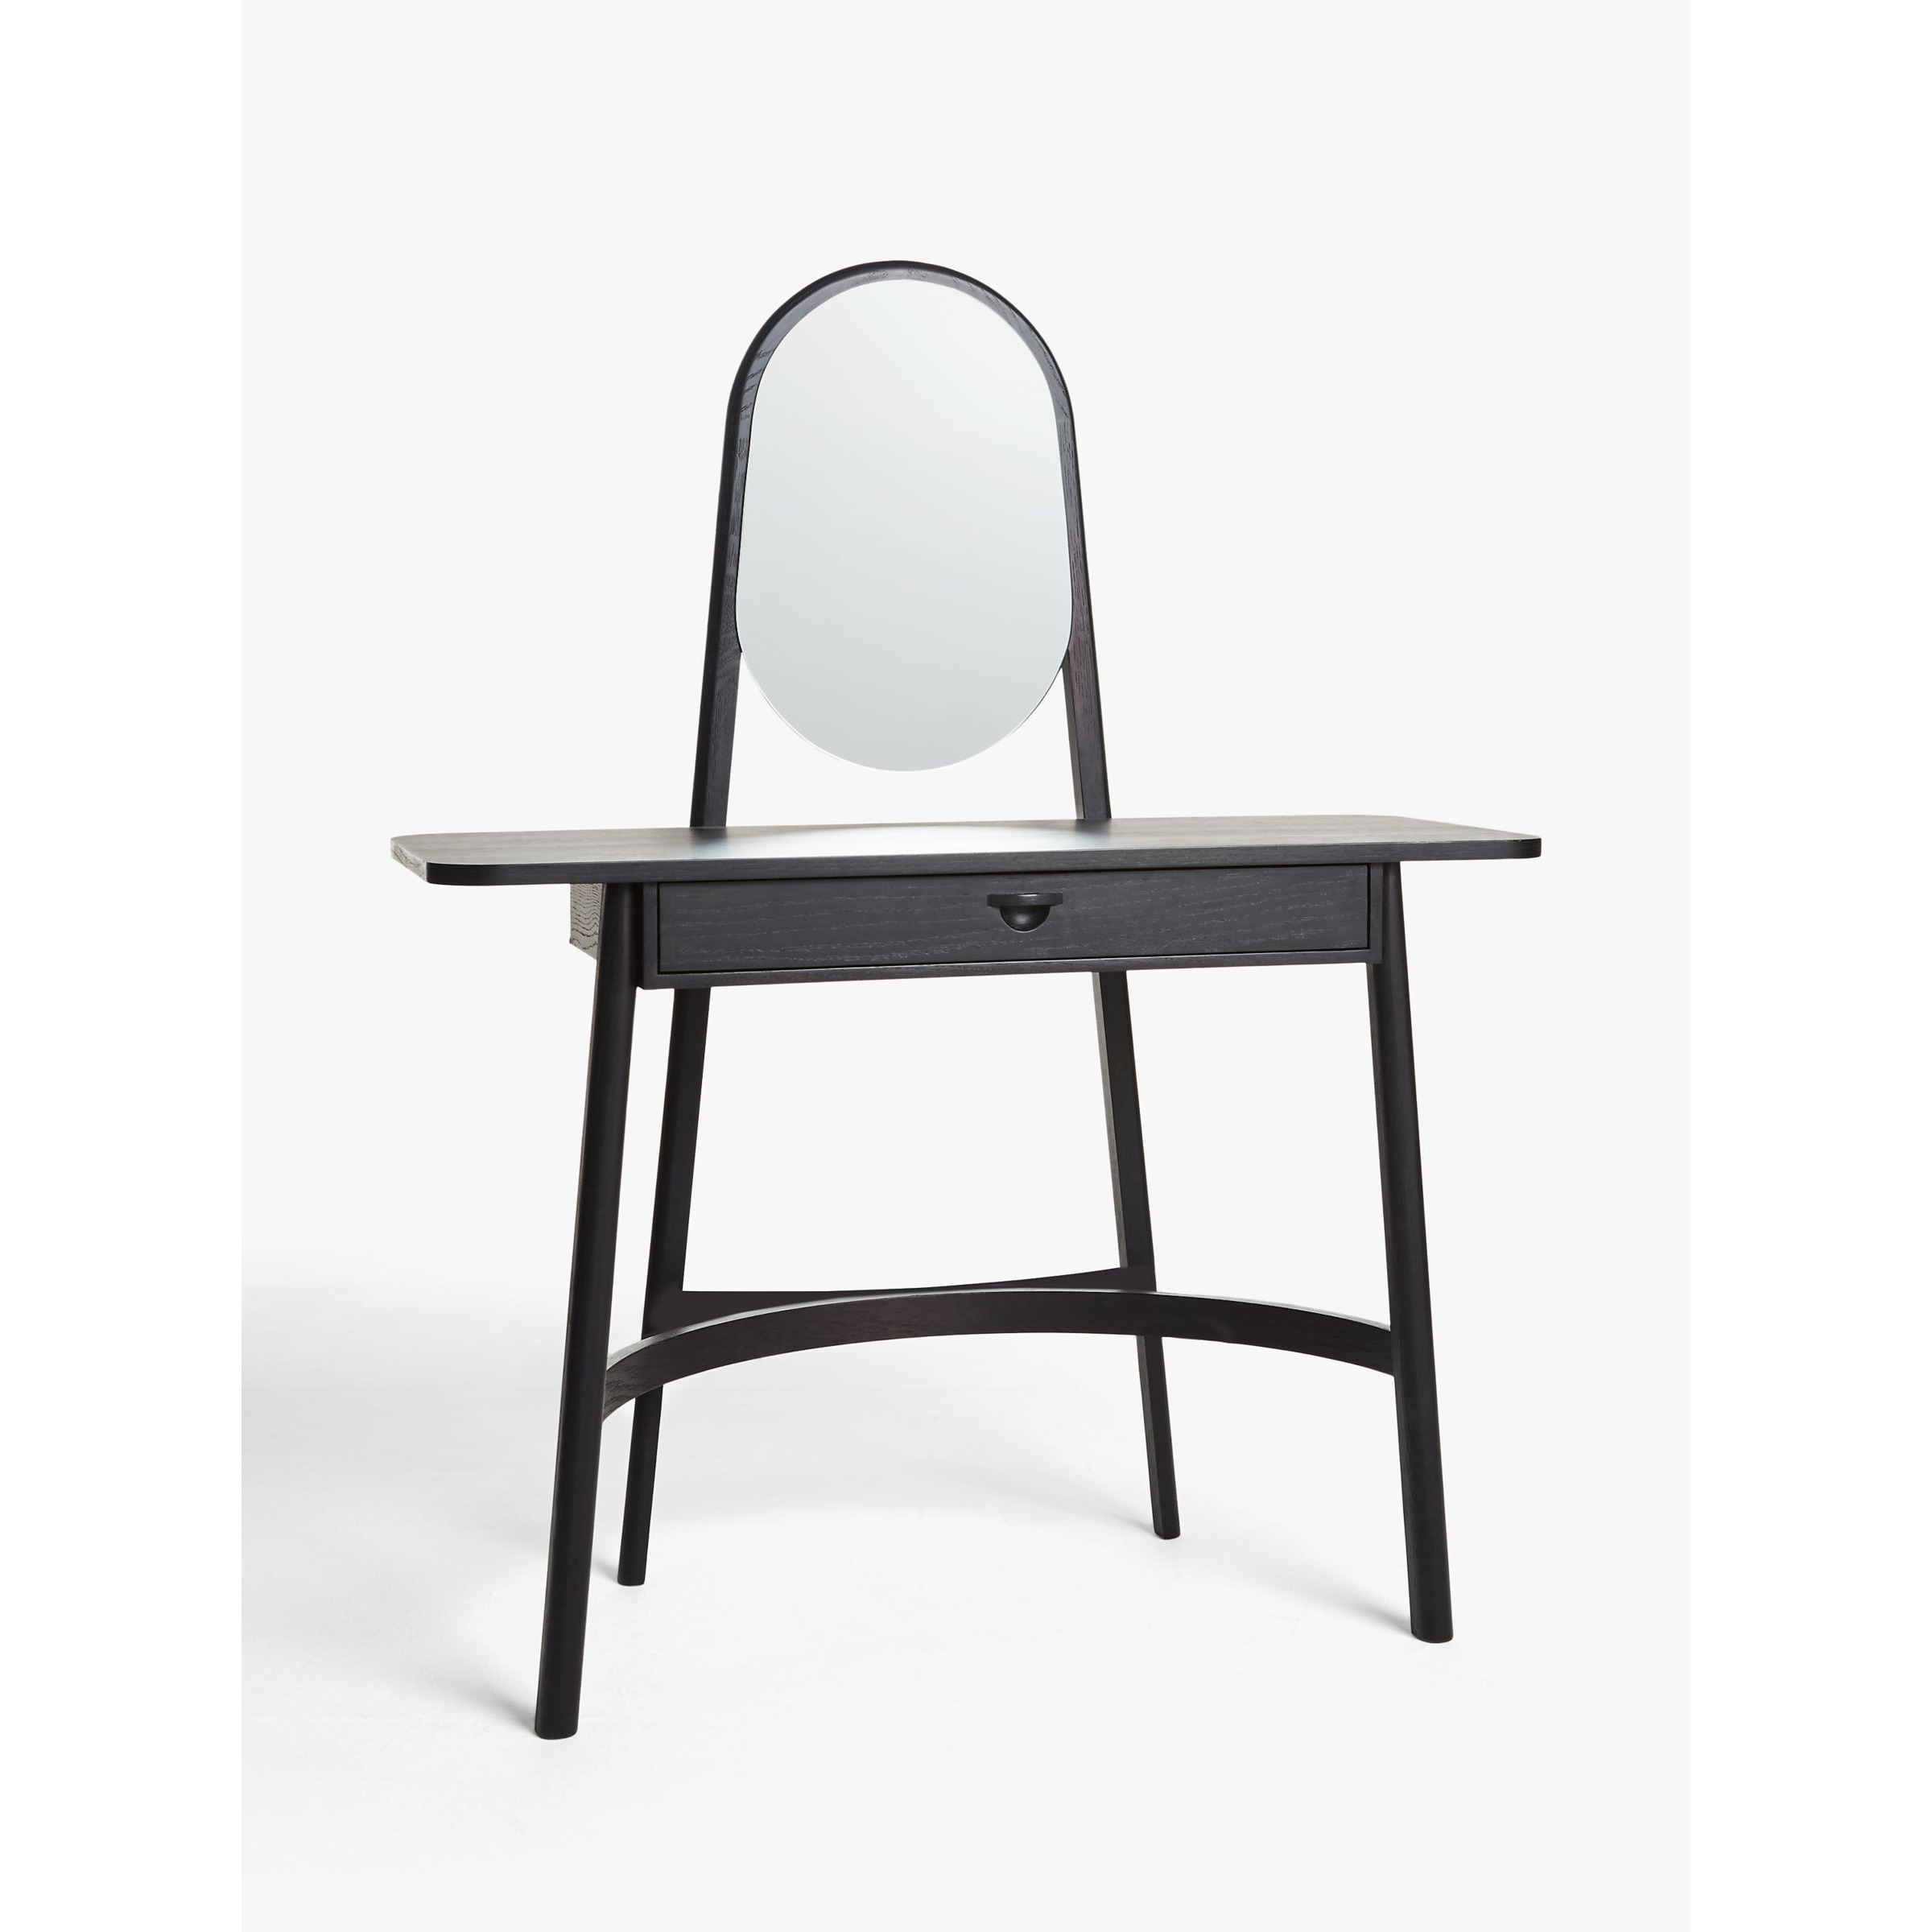 John Lewis Rattan Dressing Table and Mirror - image 1